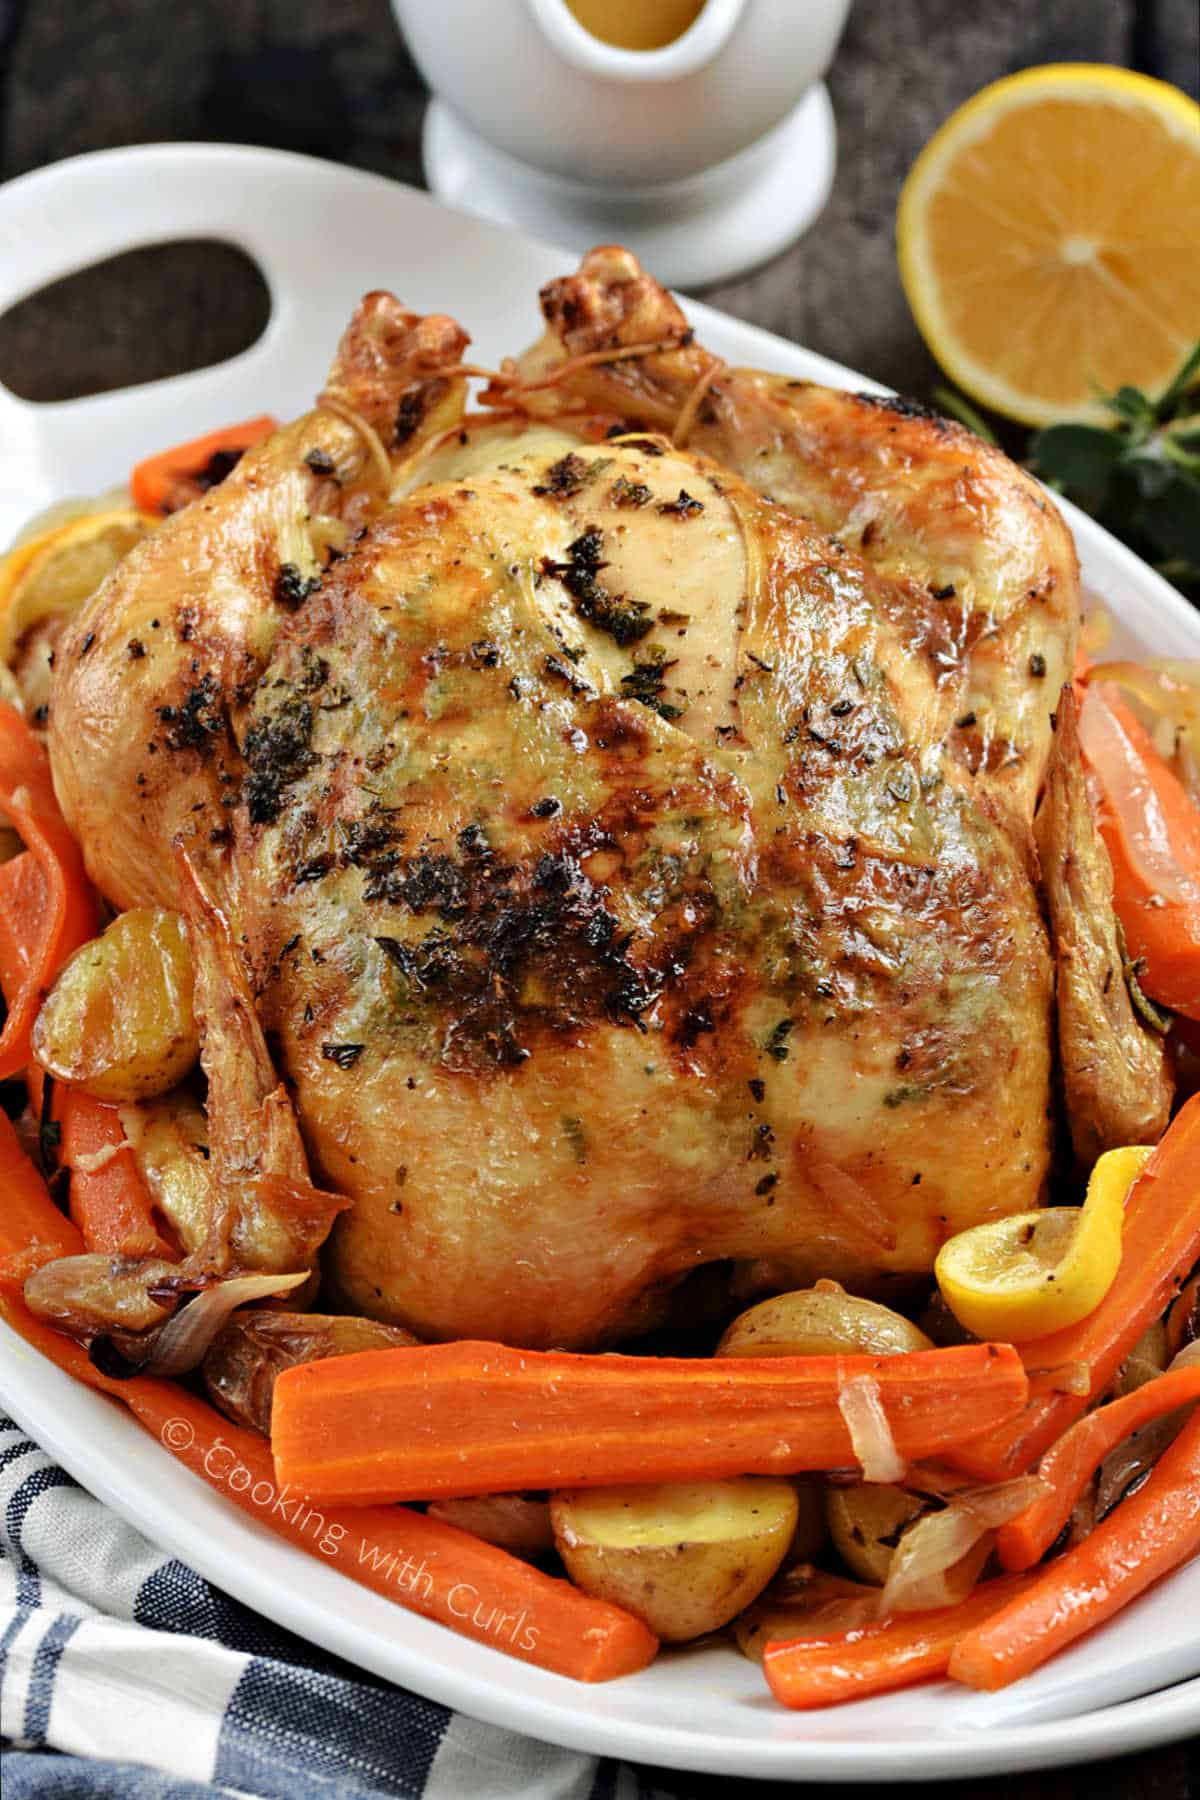 Roast chicken on a bed of carrots and potatoes with gravy and a lemon in the background.